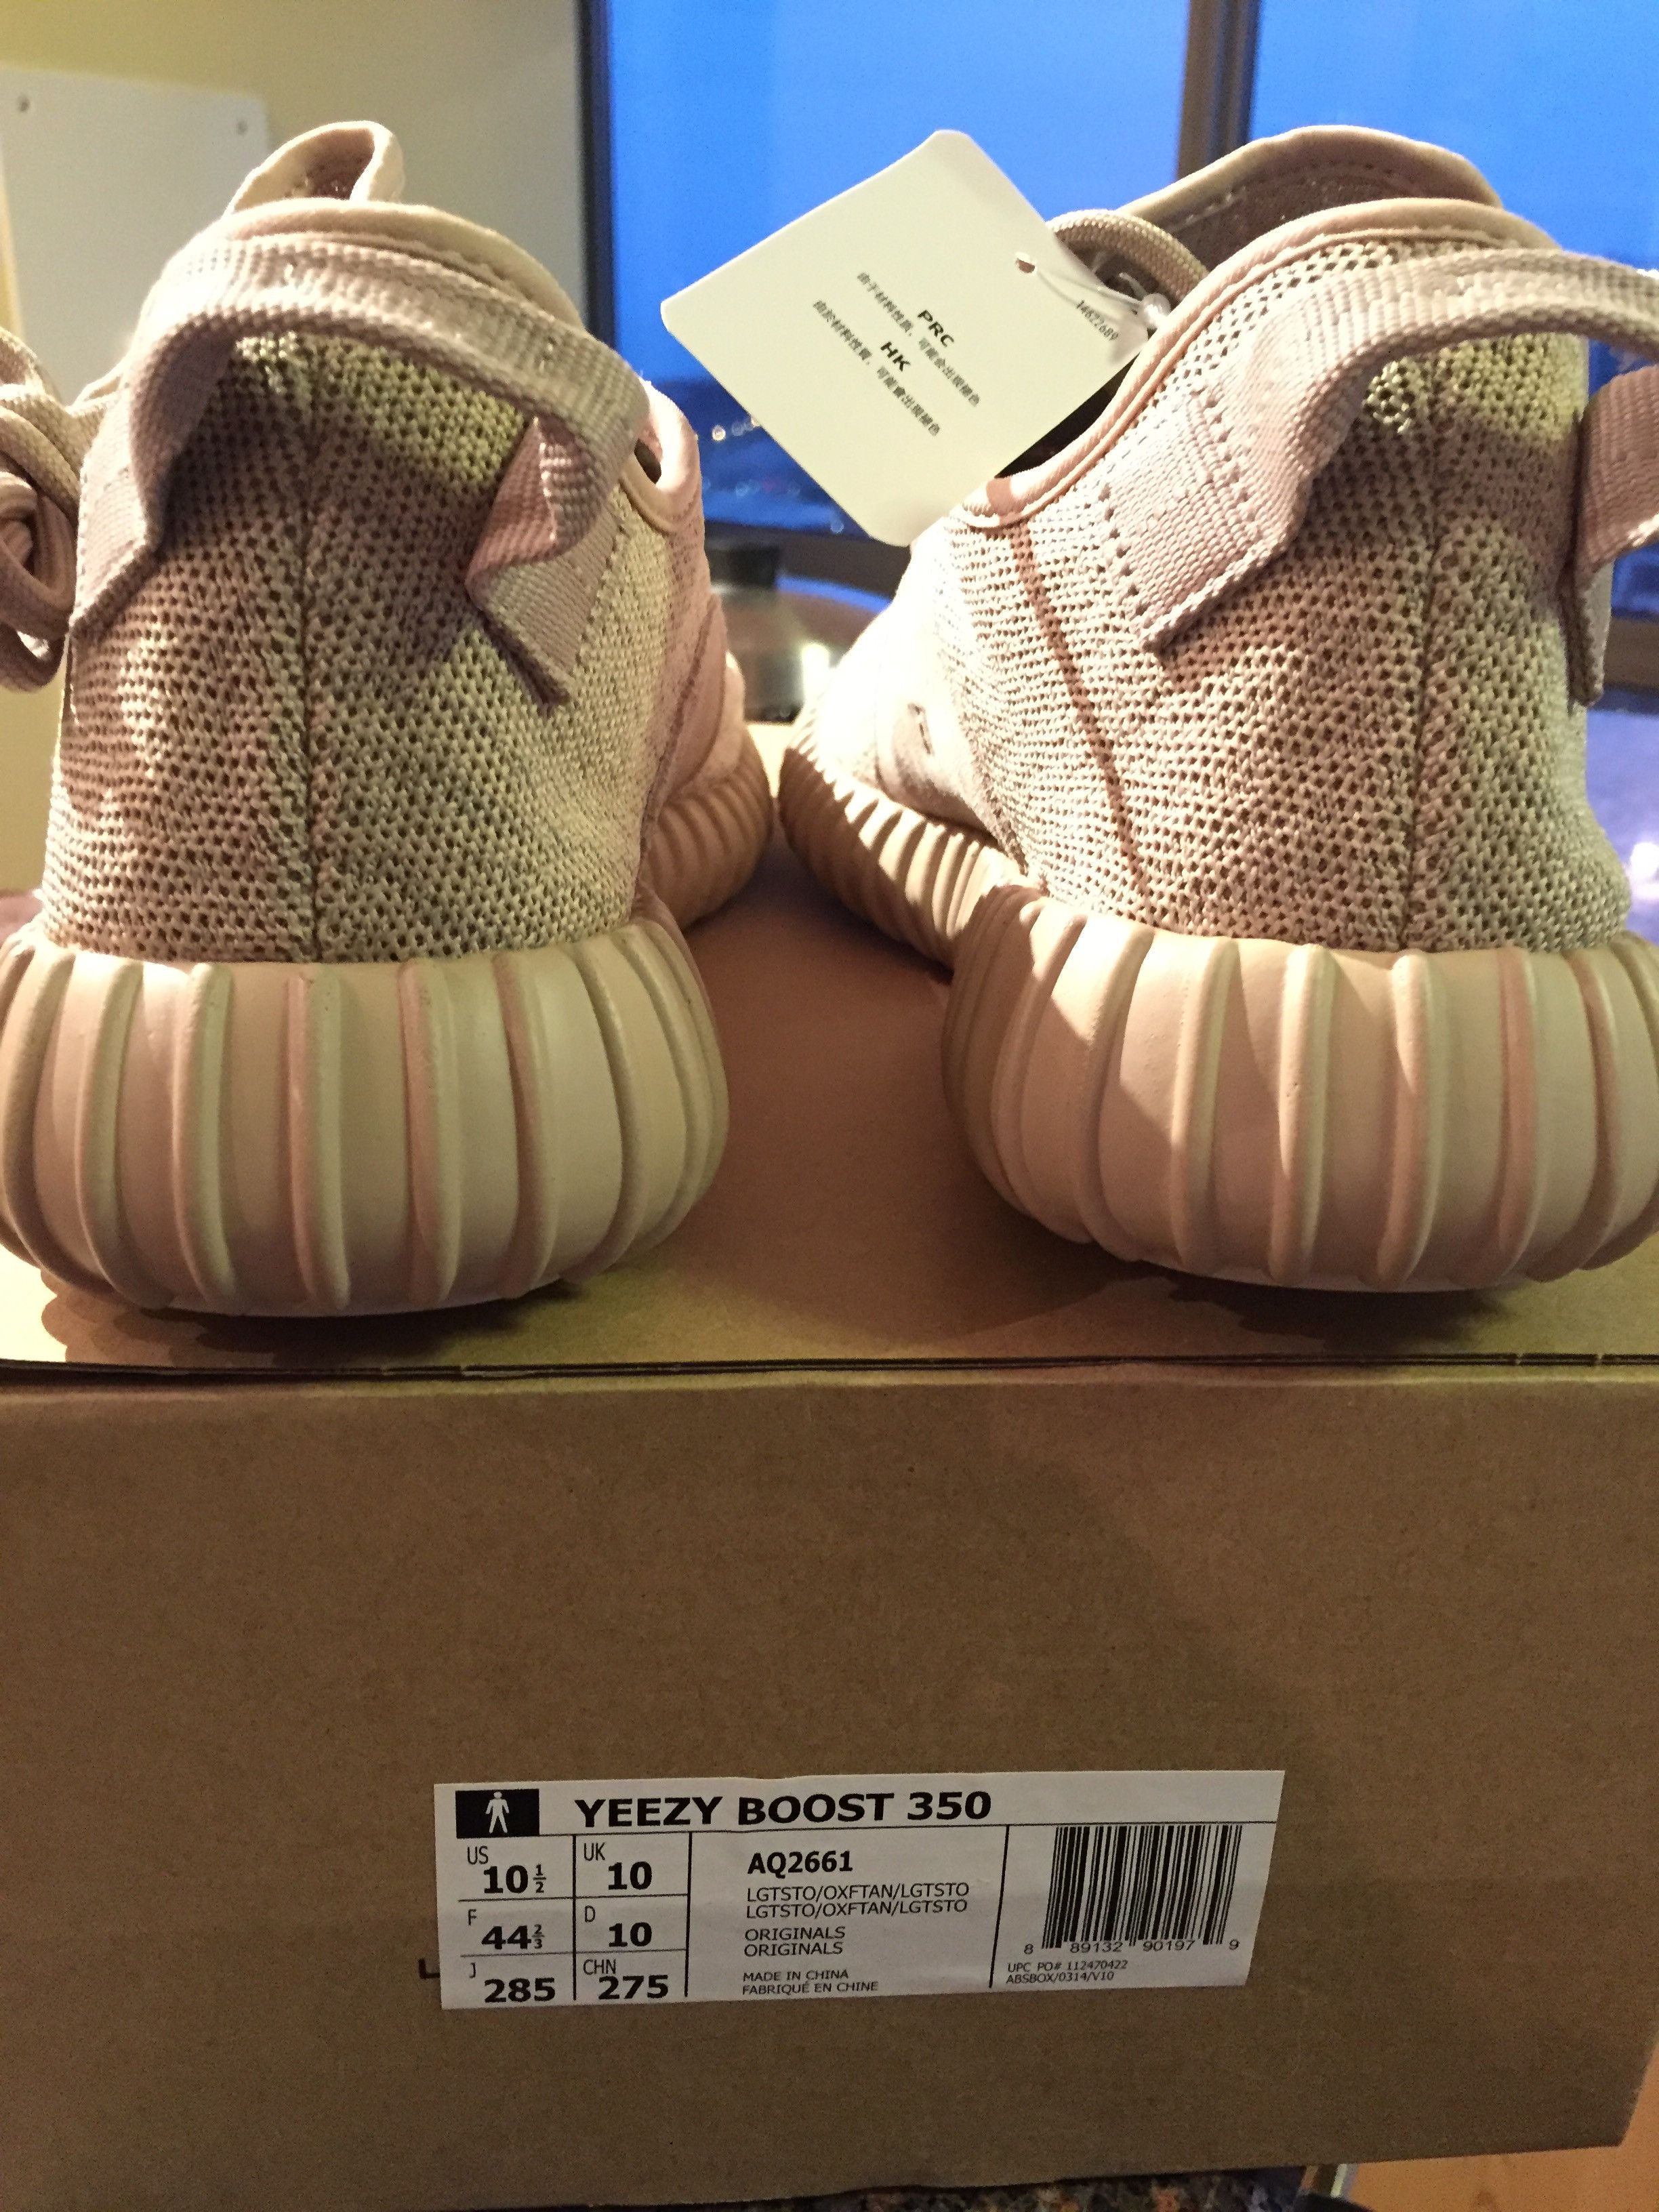 Adidas Yeezy 350 Oxford Tans - NEW Size US 10.5 / EU 43-44 - 2 Preview